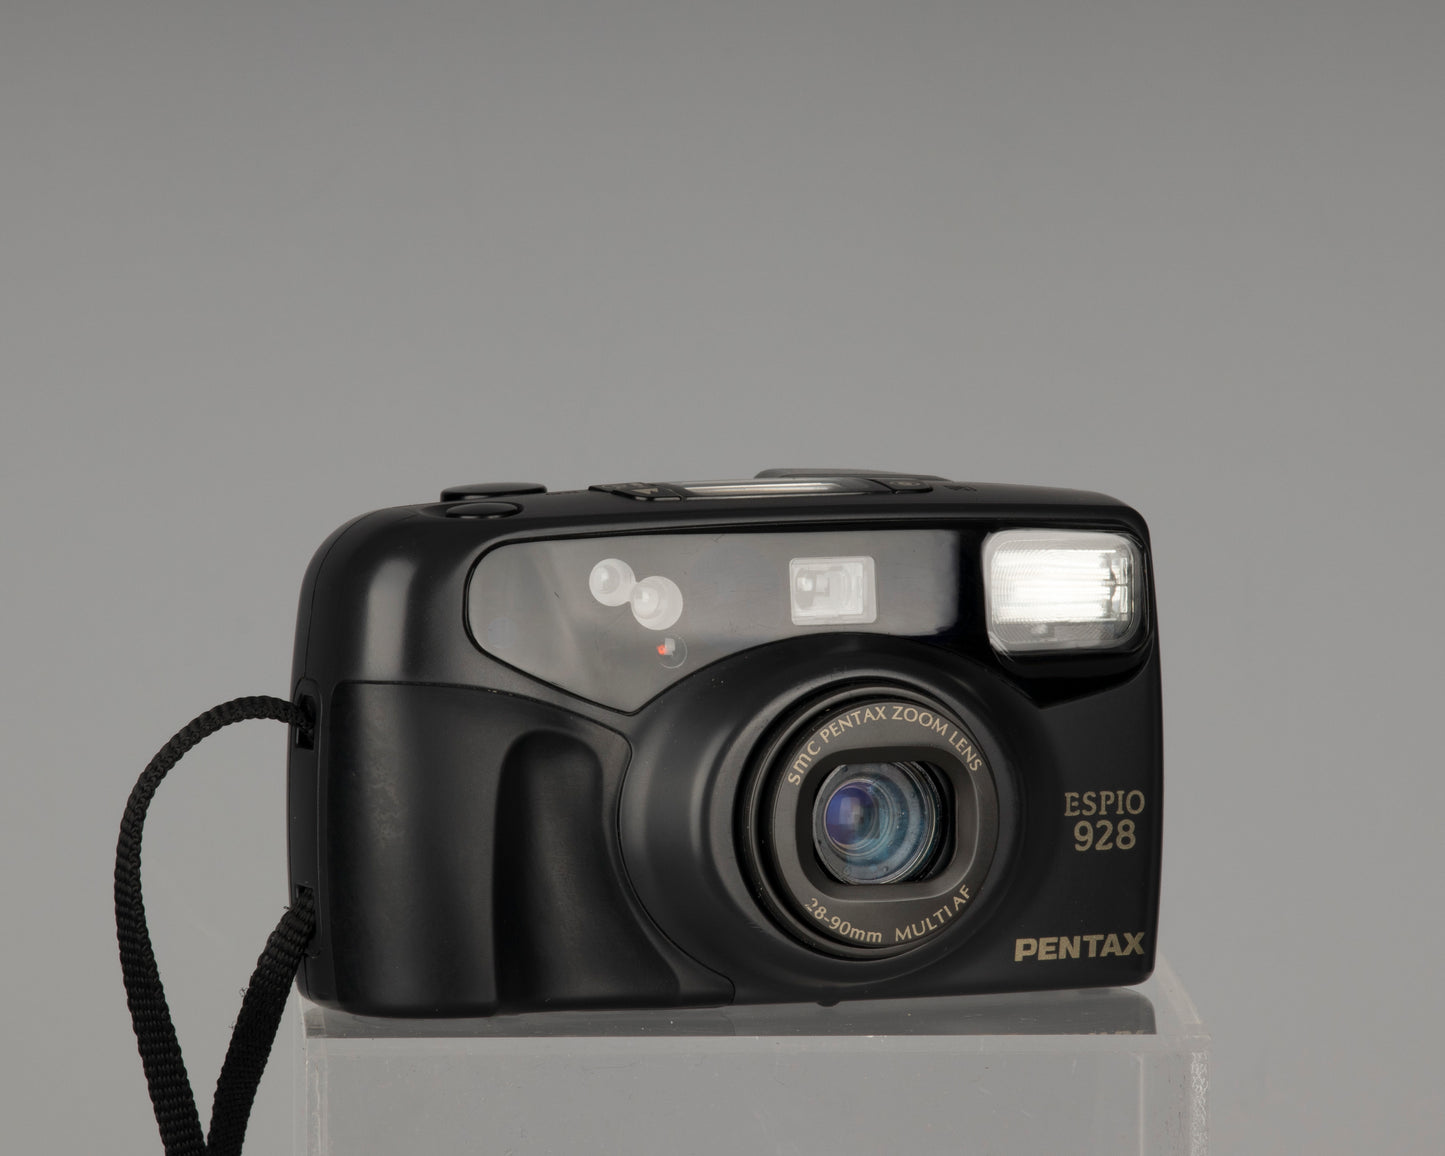 Pentax Espio 928: a superb 35mm point and shoot with a wide 28-90mm zoom range